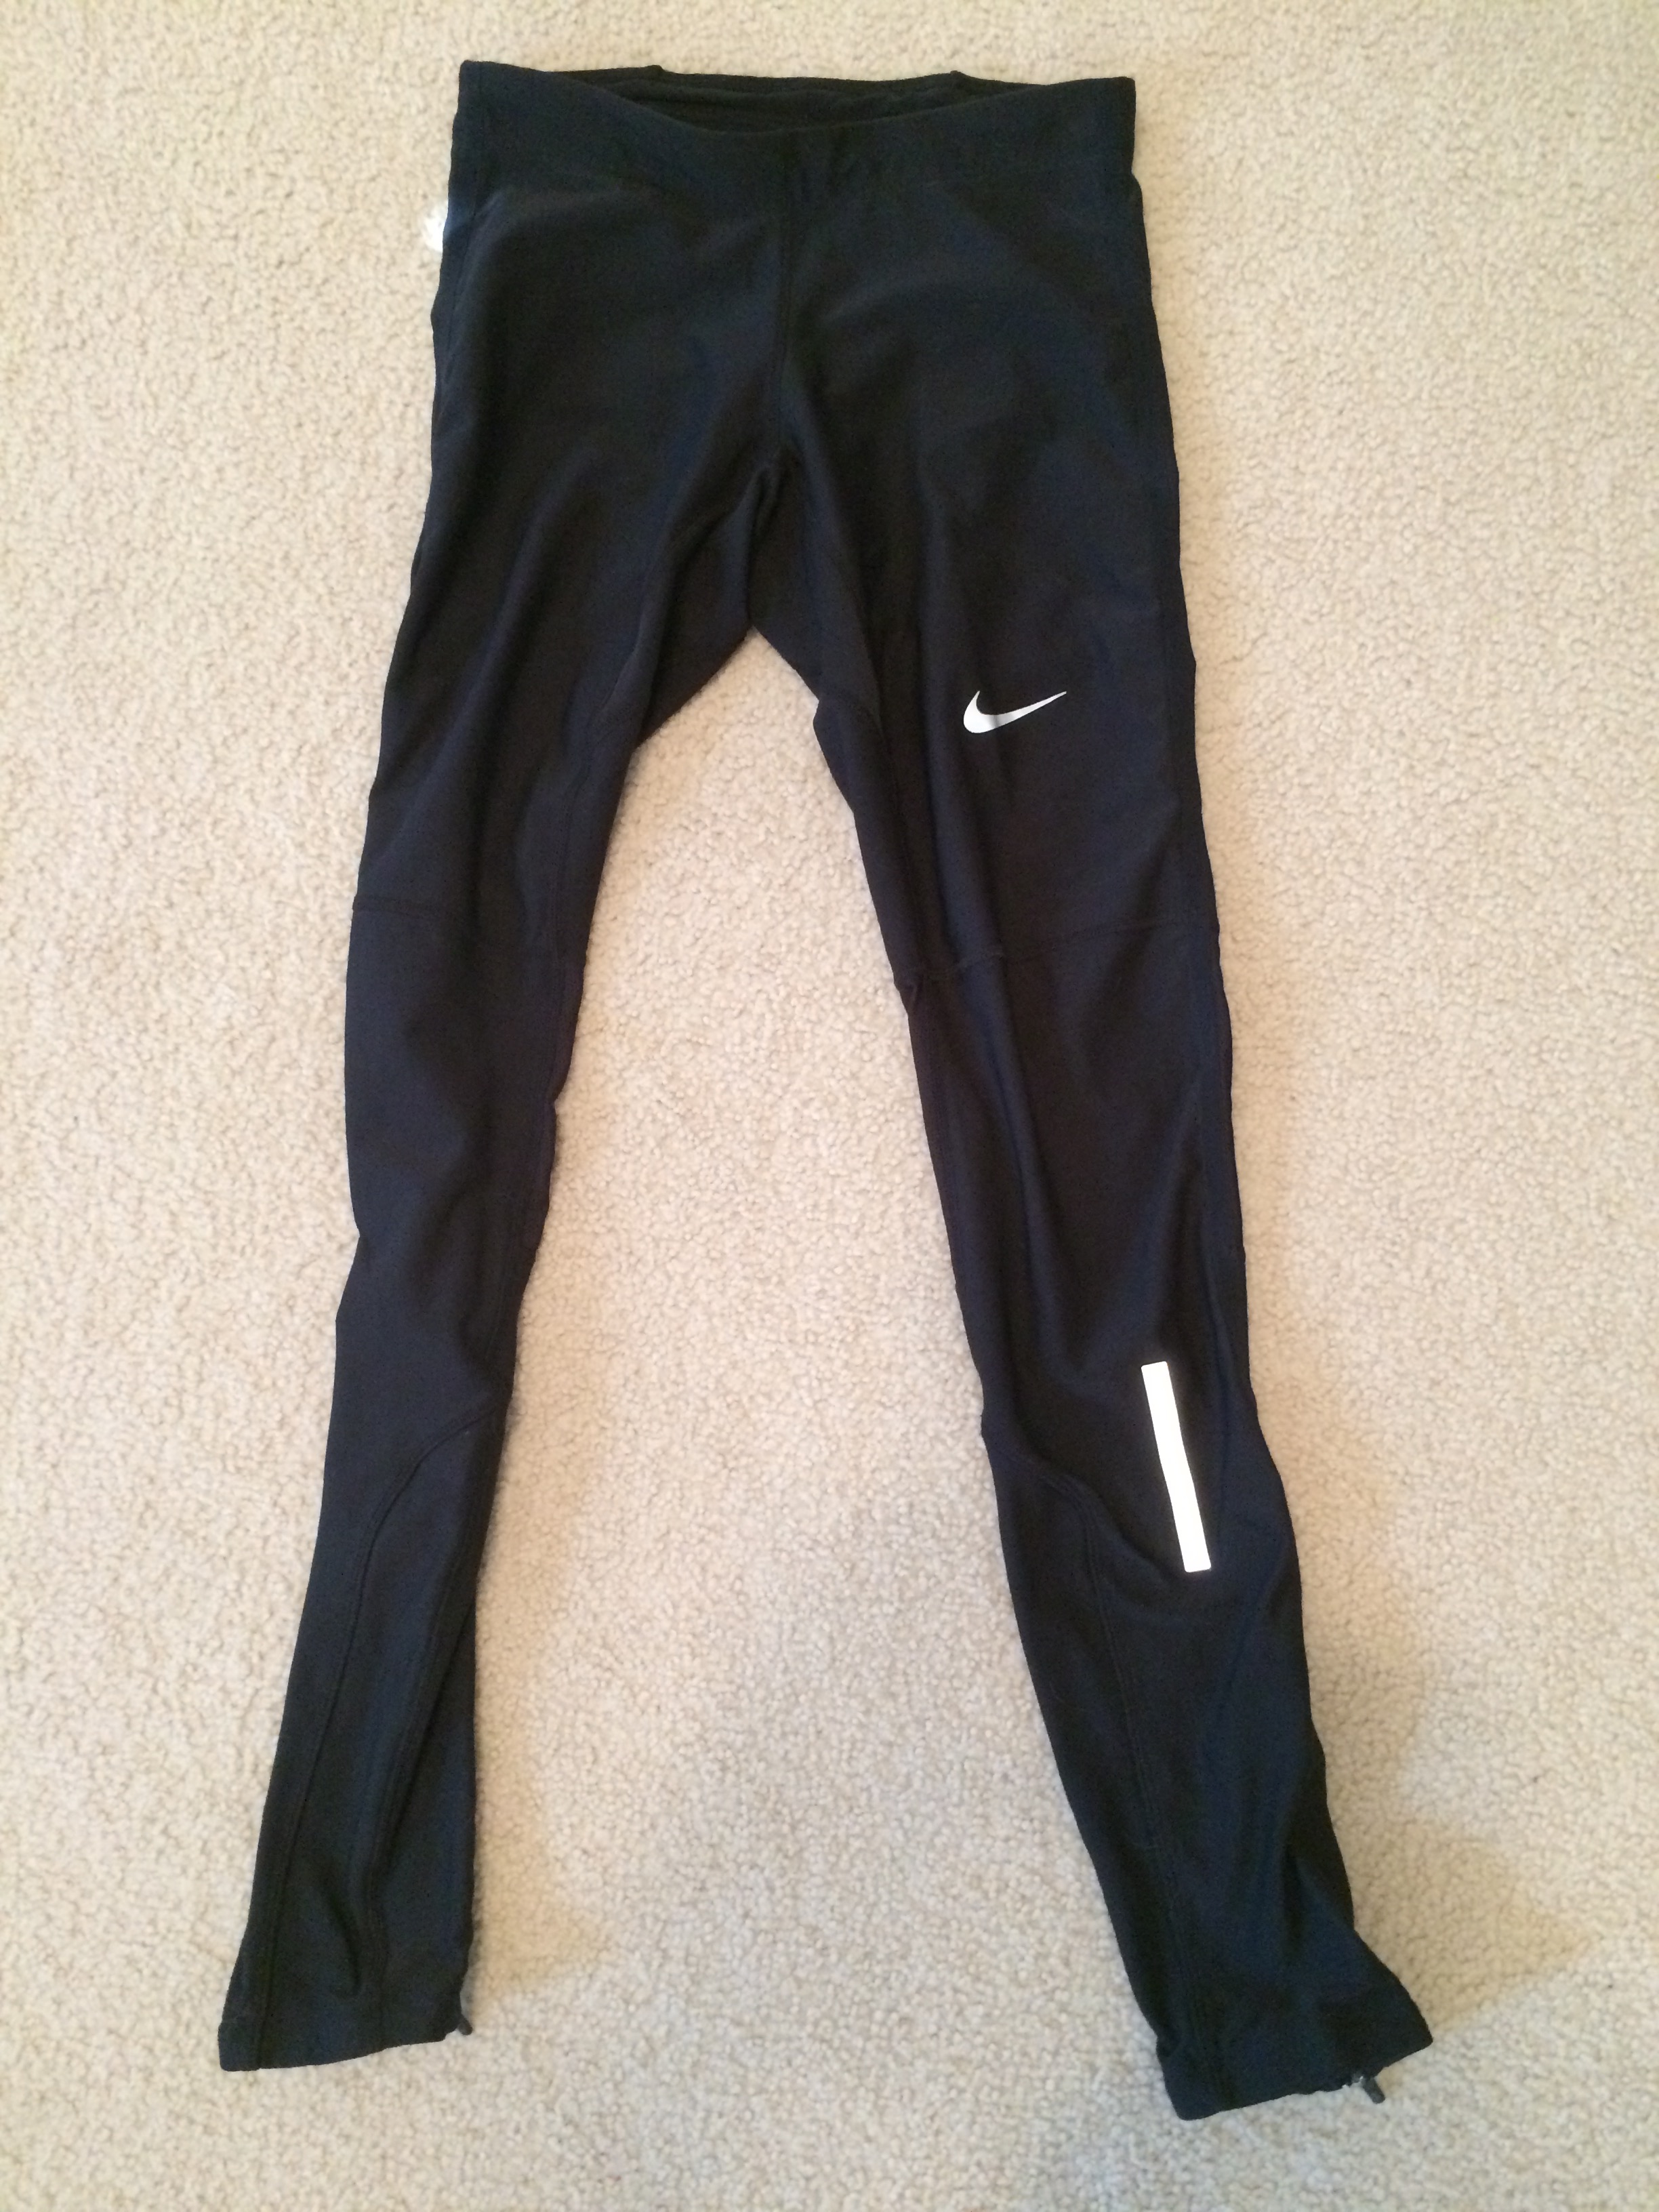 Which compression pants are the best 